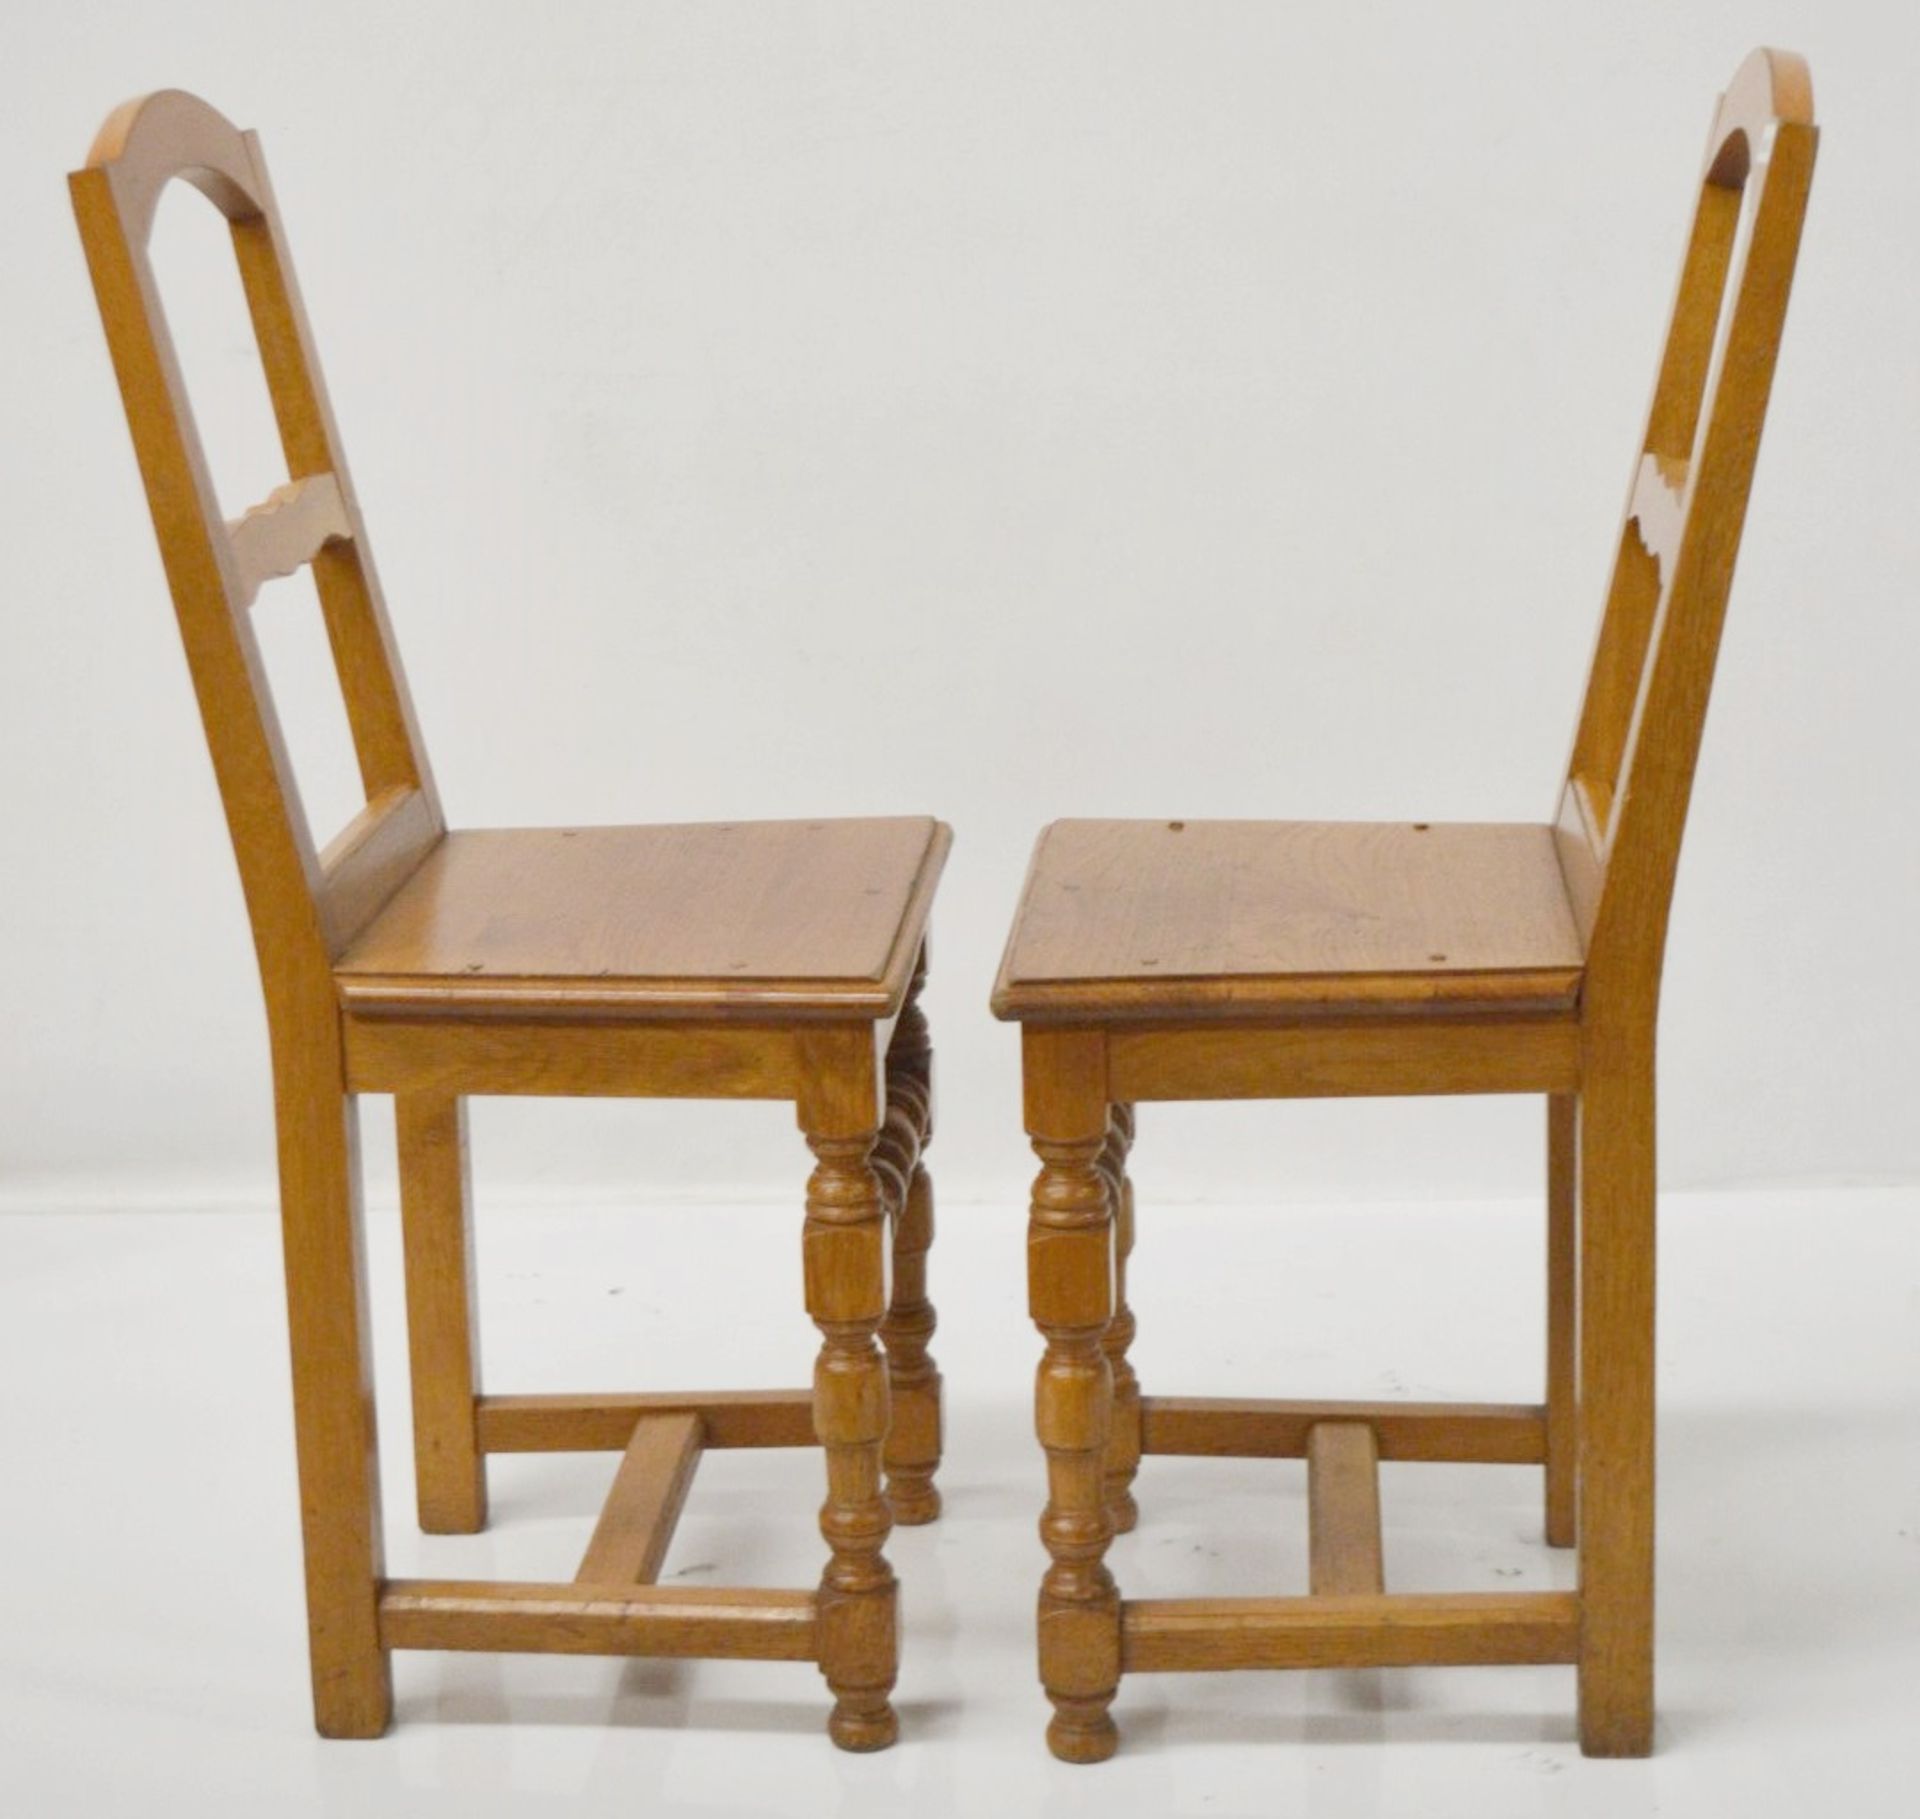 14 x Solid Wood Bistro Dining Chairs - Removed From A Leading Patisserie In London - Ref: MA103 - Image 2 of 5